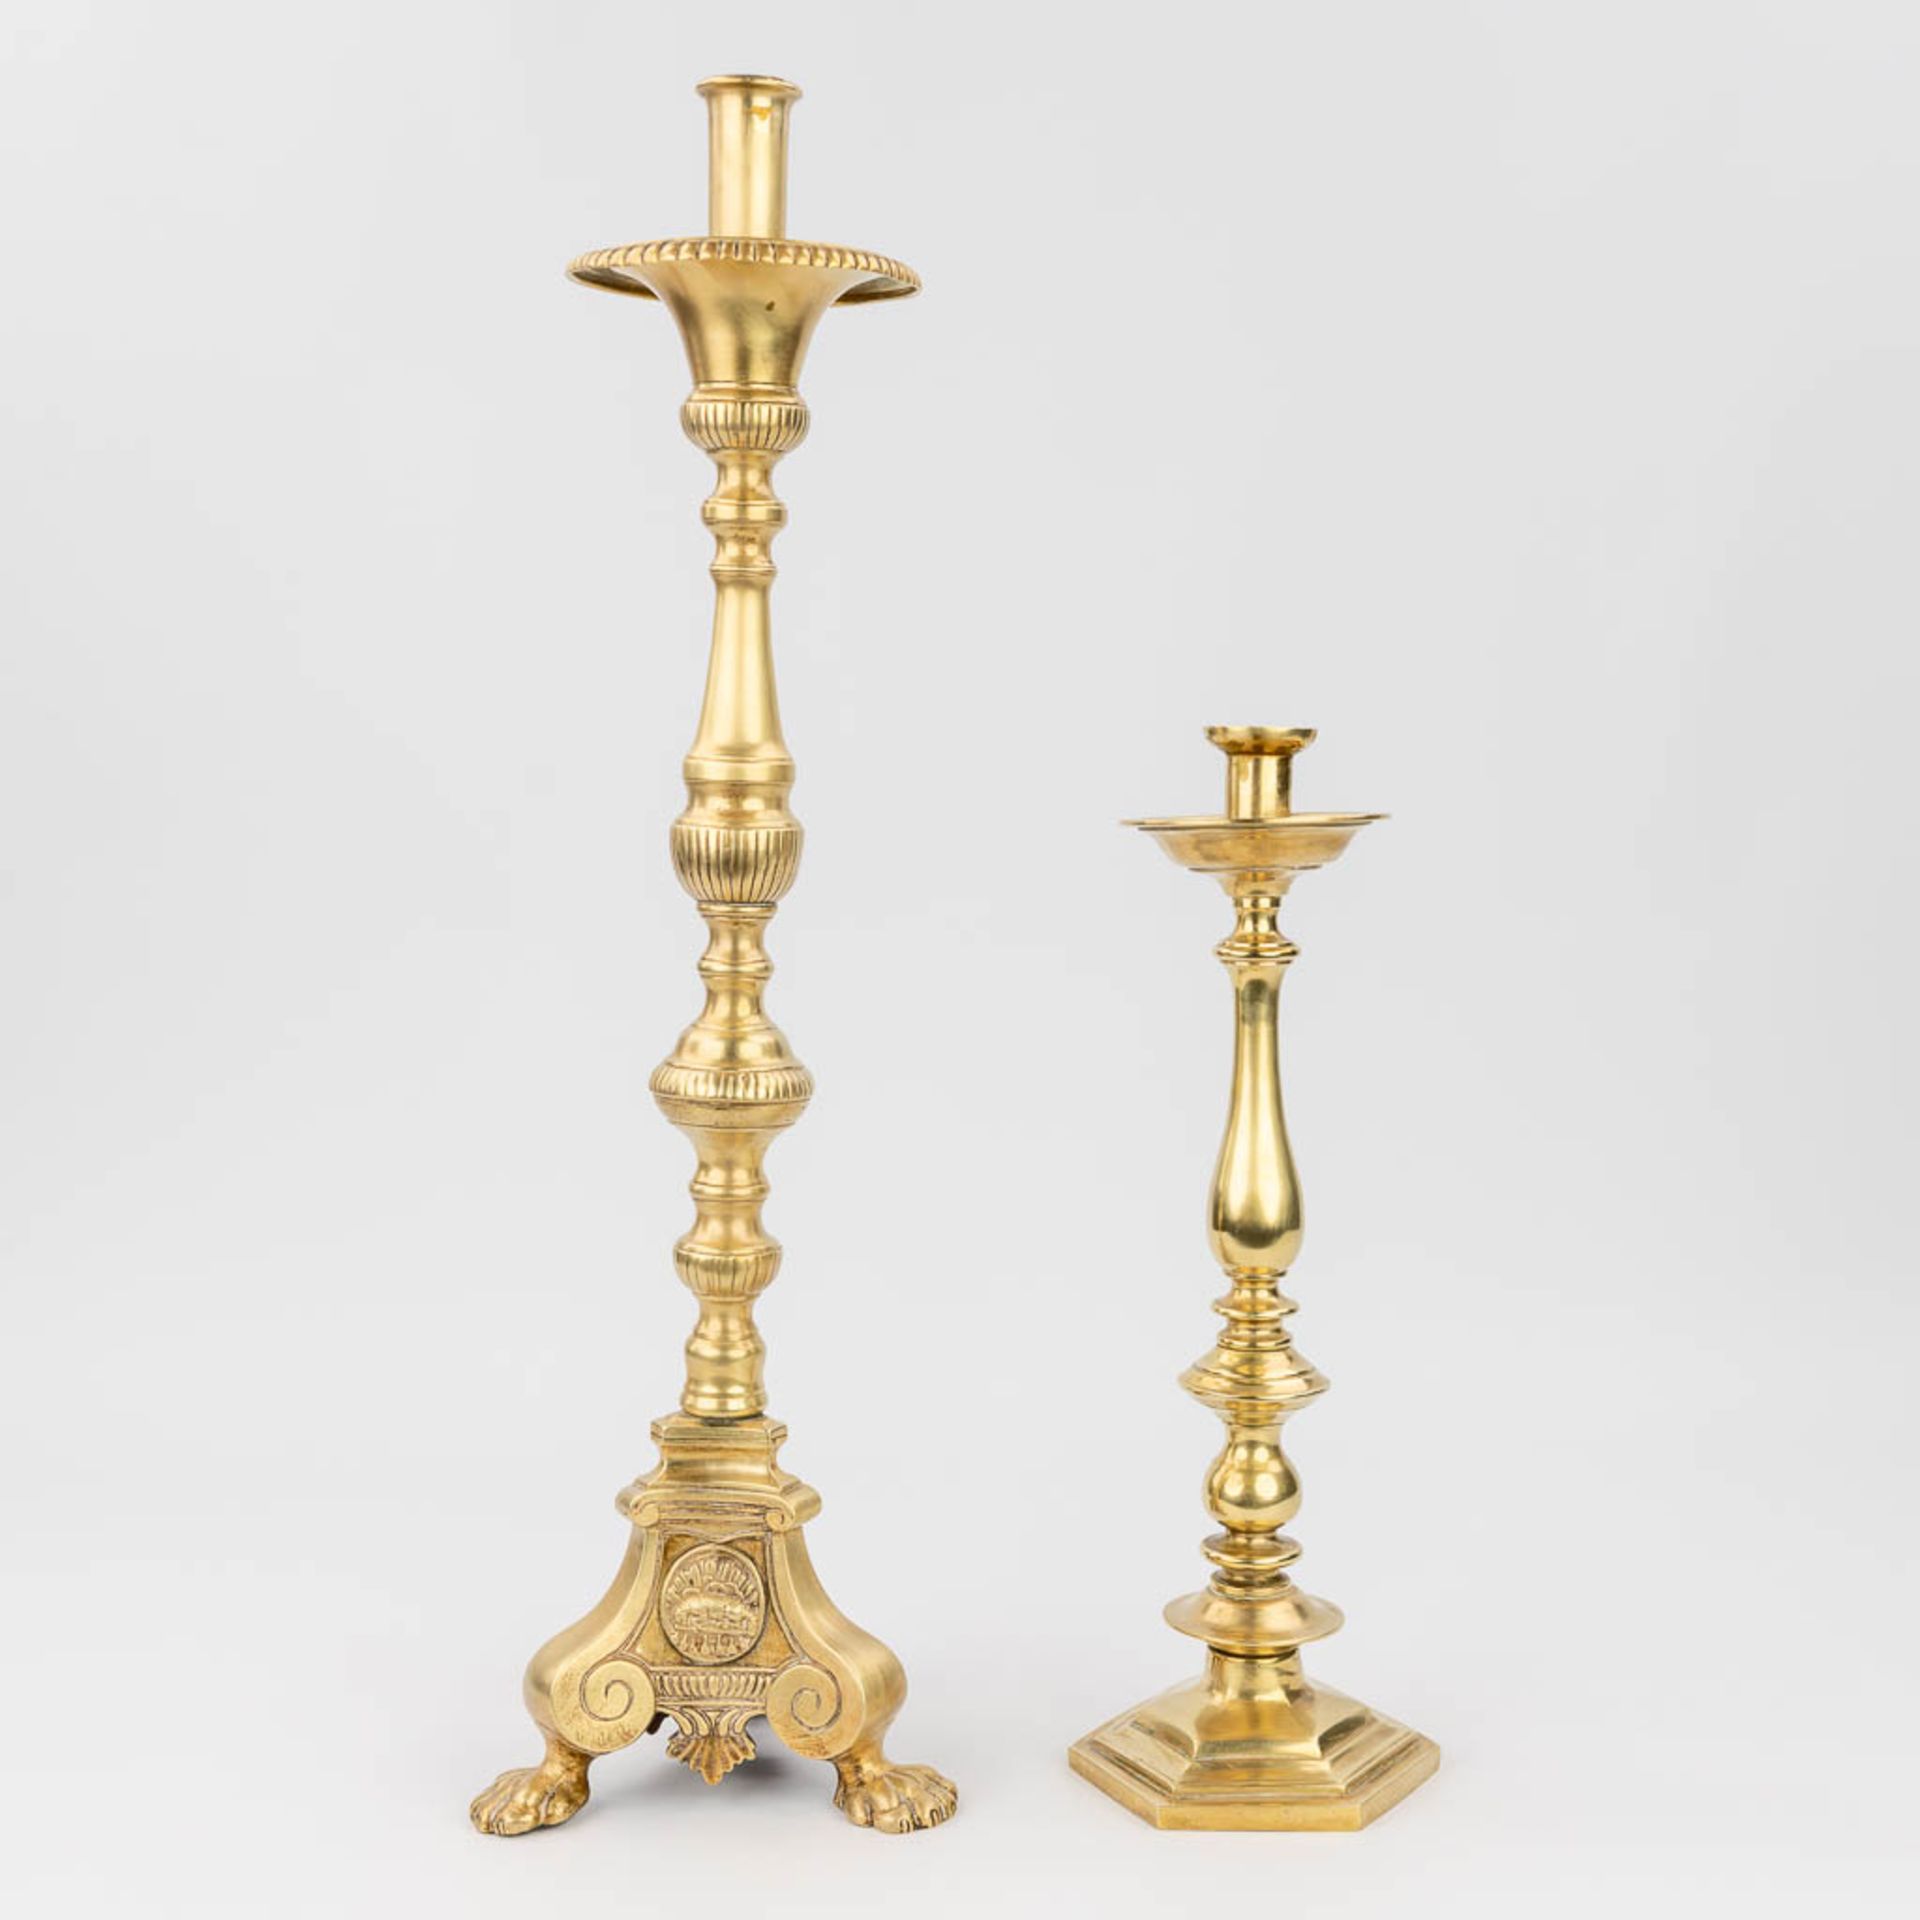 A collection of 2 candelabra made of polished bronze. (H:65 cm) - Image 7 of 14